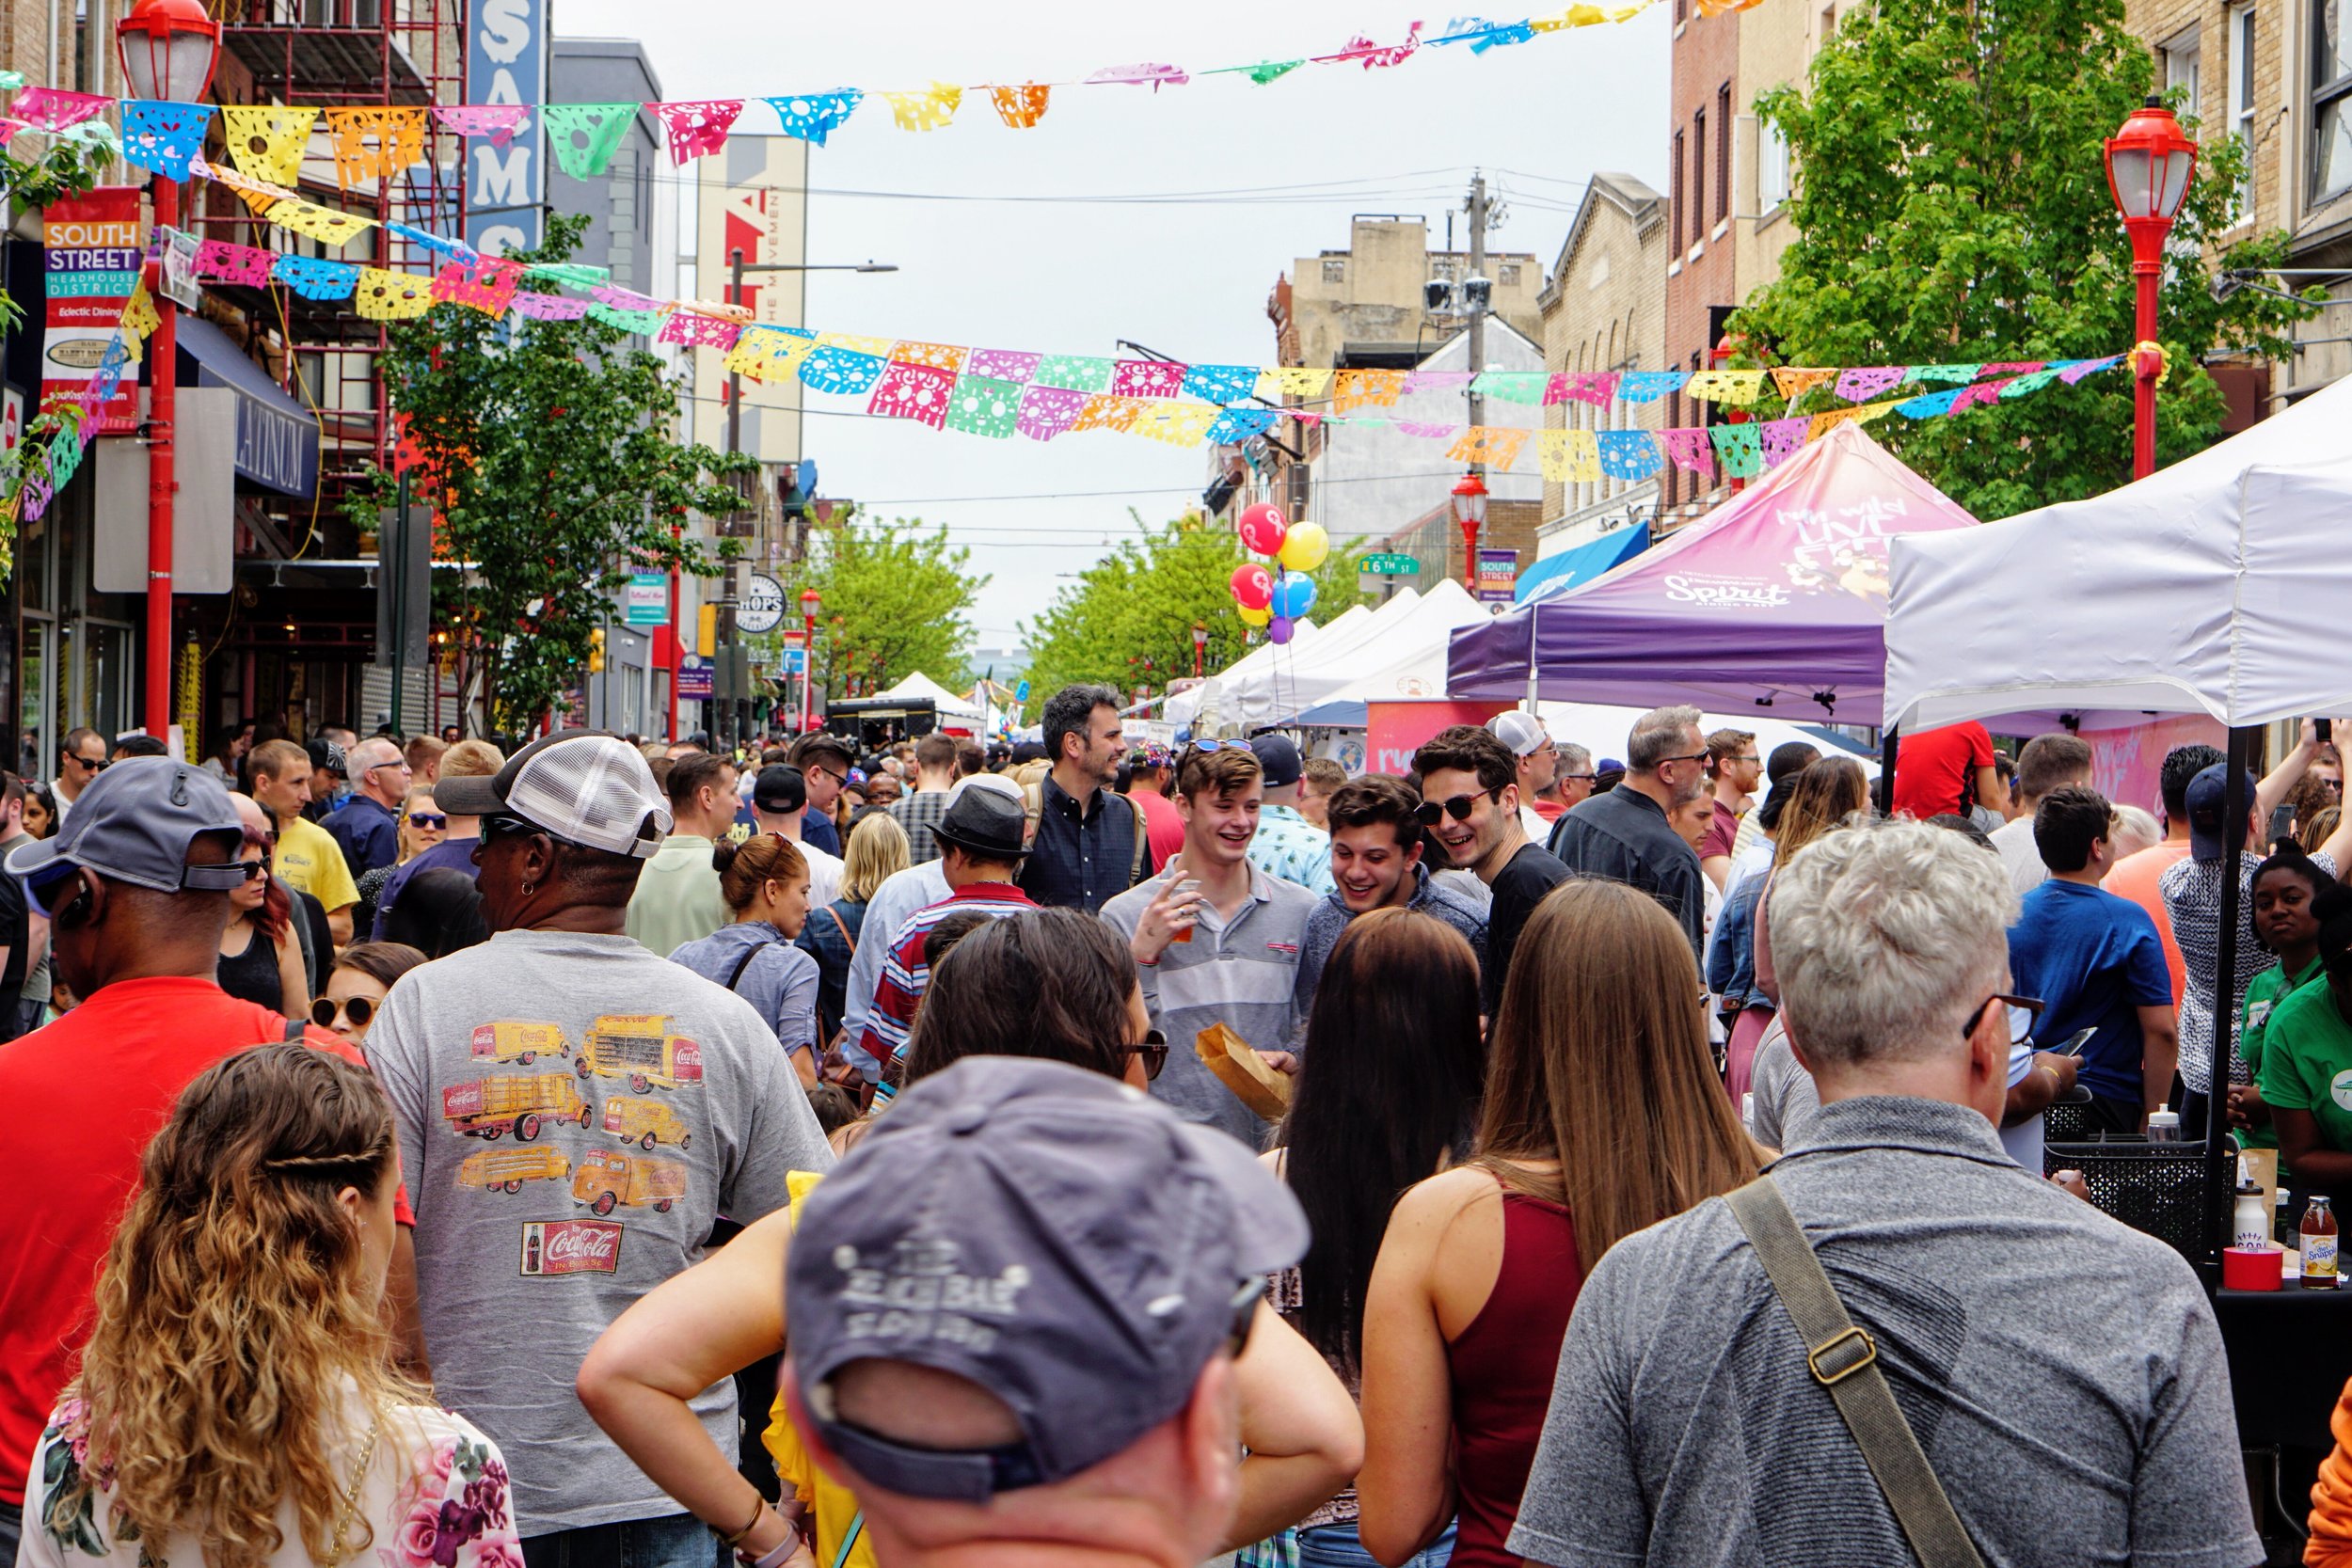 South Street Spring Festival Returns on Saturday, May 4th with Hundreds